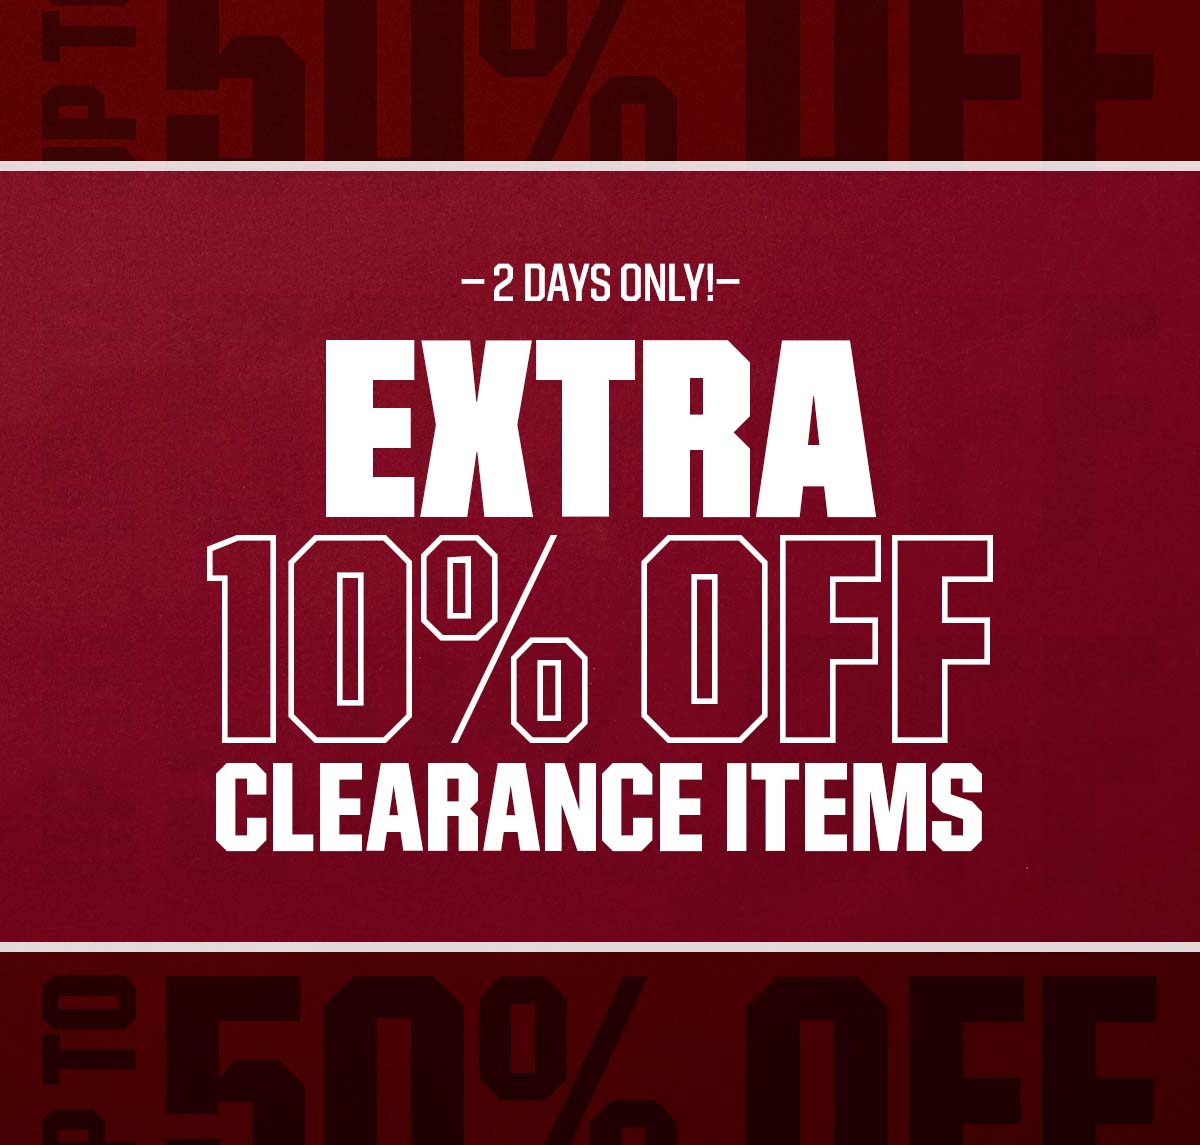 2 days only! Extra 10% off clearance items.